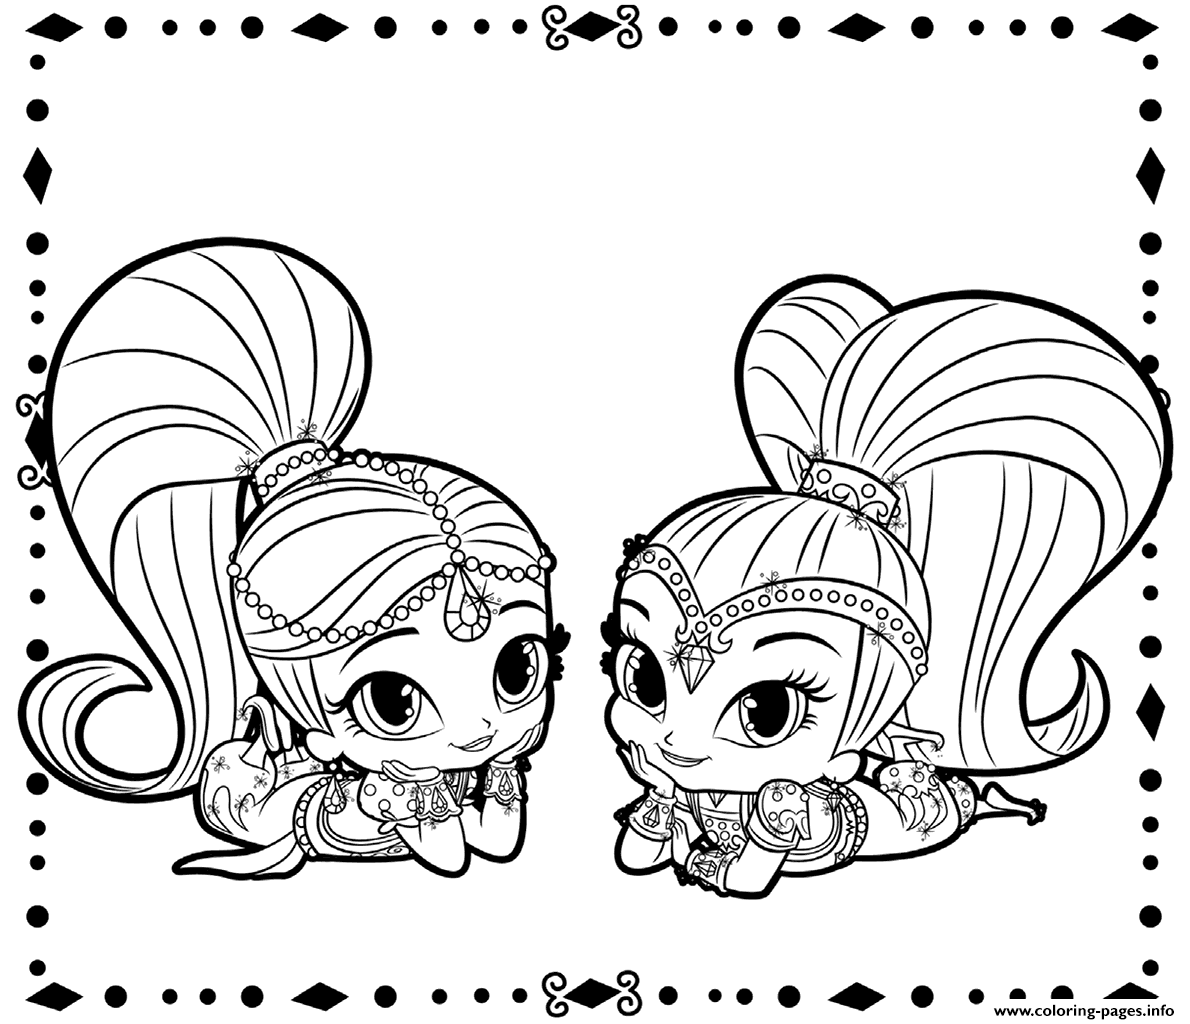 Shimmer And Shine coloring pages